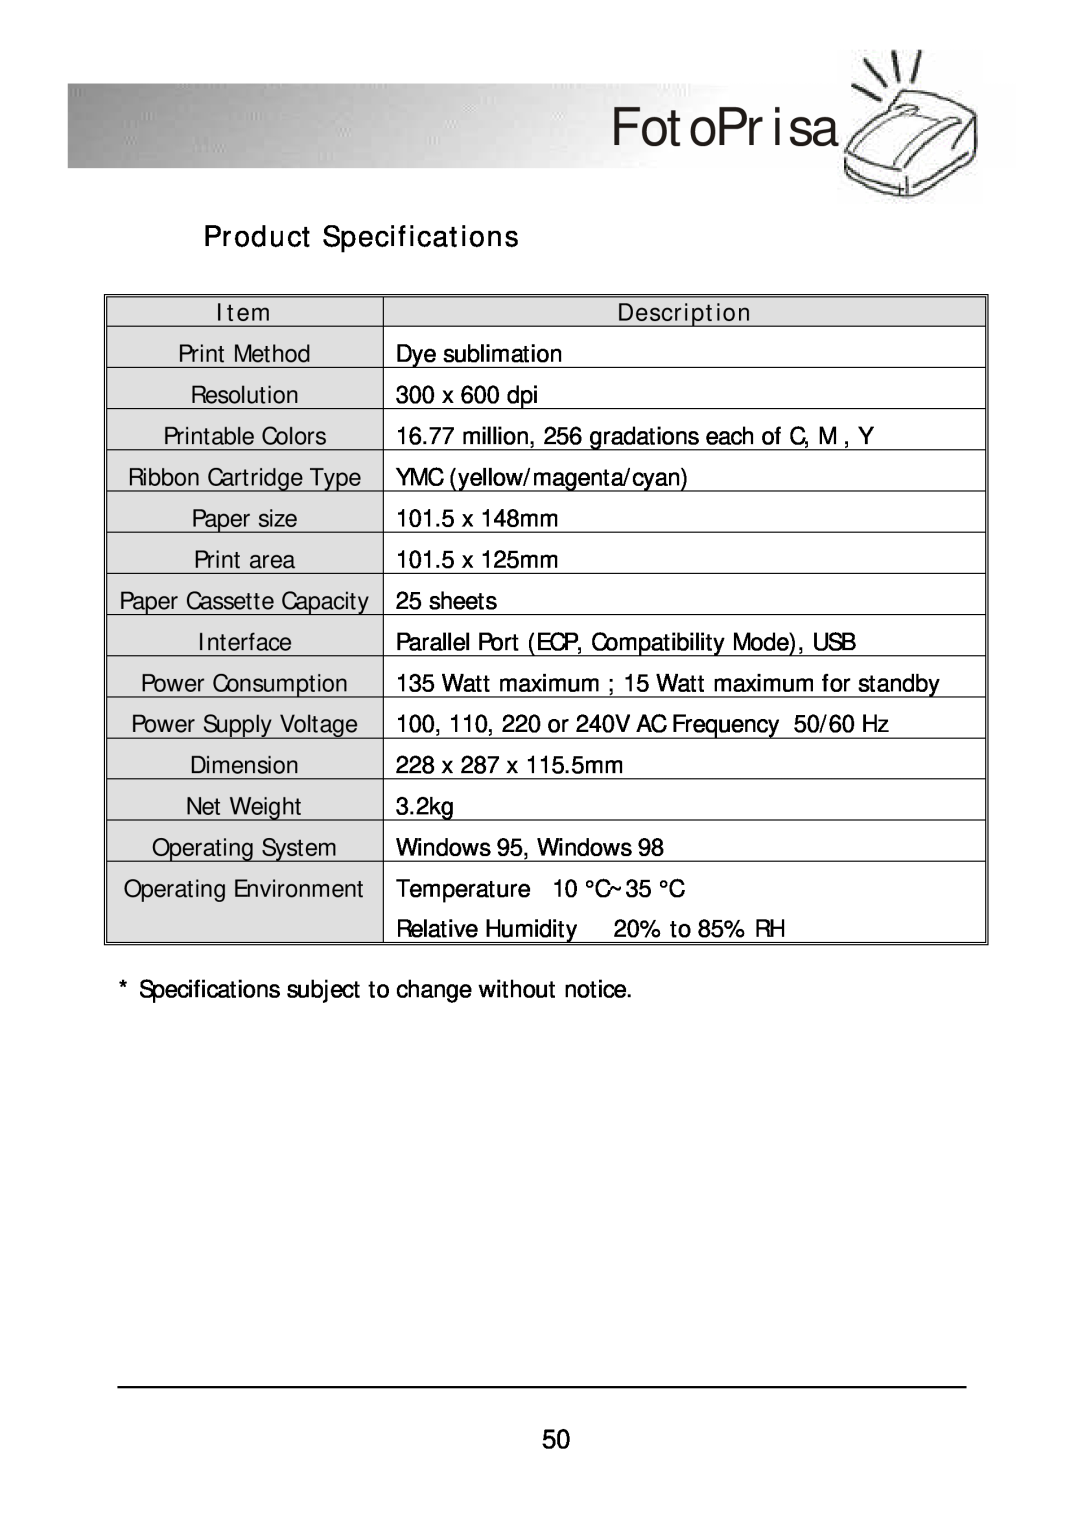 Acer 300P user manual Product Specifications, Description, FotoPrisa 